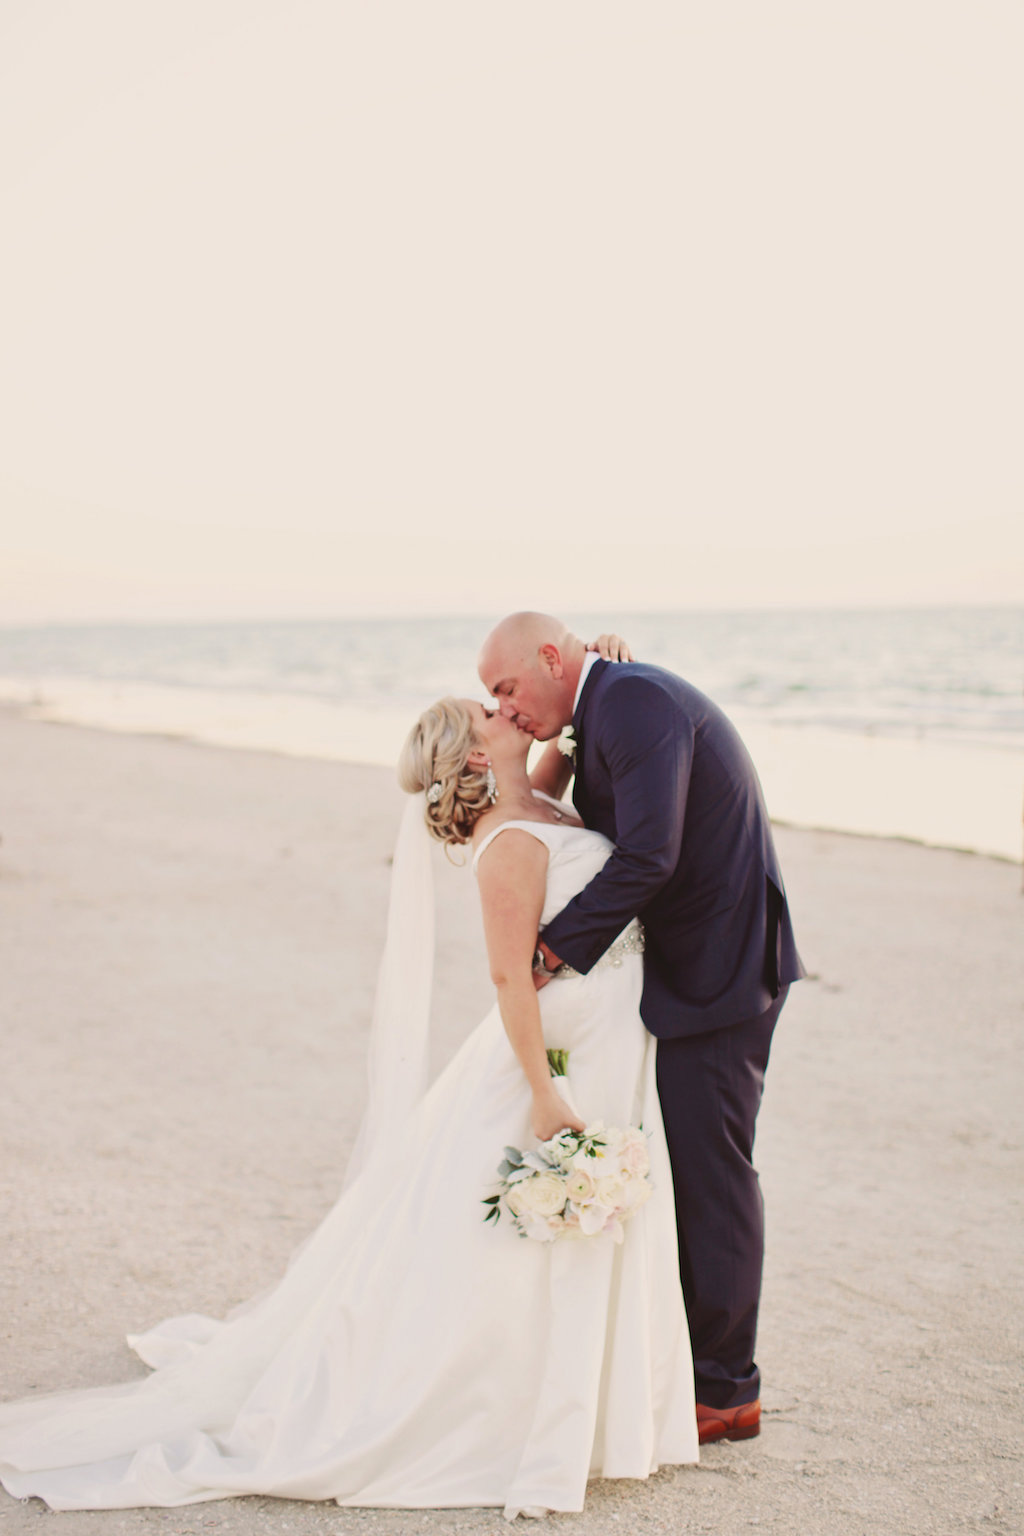 Outdoor Beach Bride and Groom Wedding Portrait, Bride with White and Greenery Bouquet, Groom in Navy Blue Suit | Tampa Bay Wedding